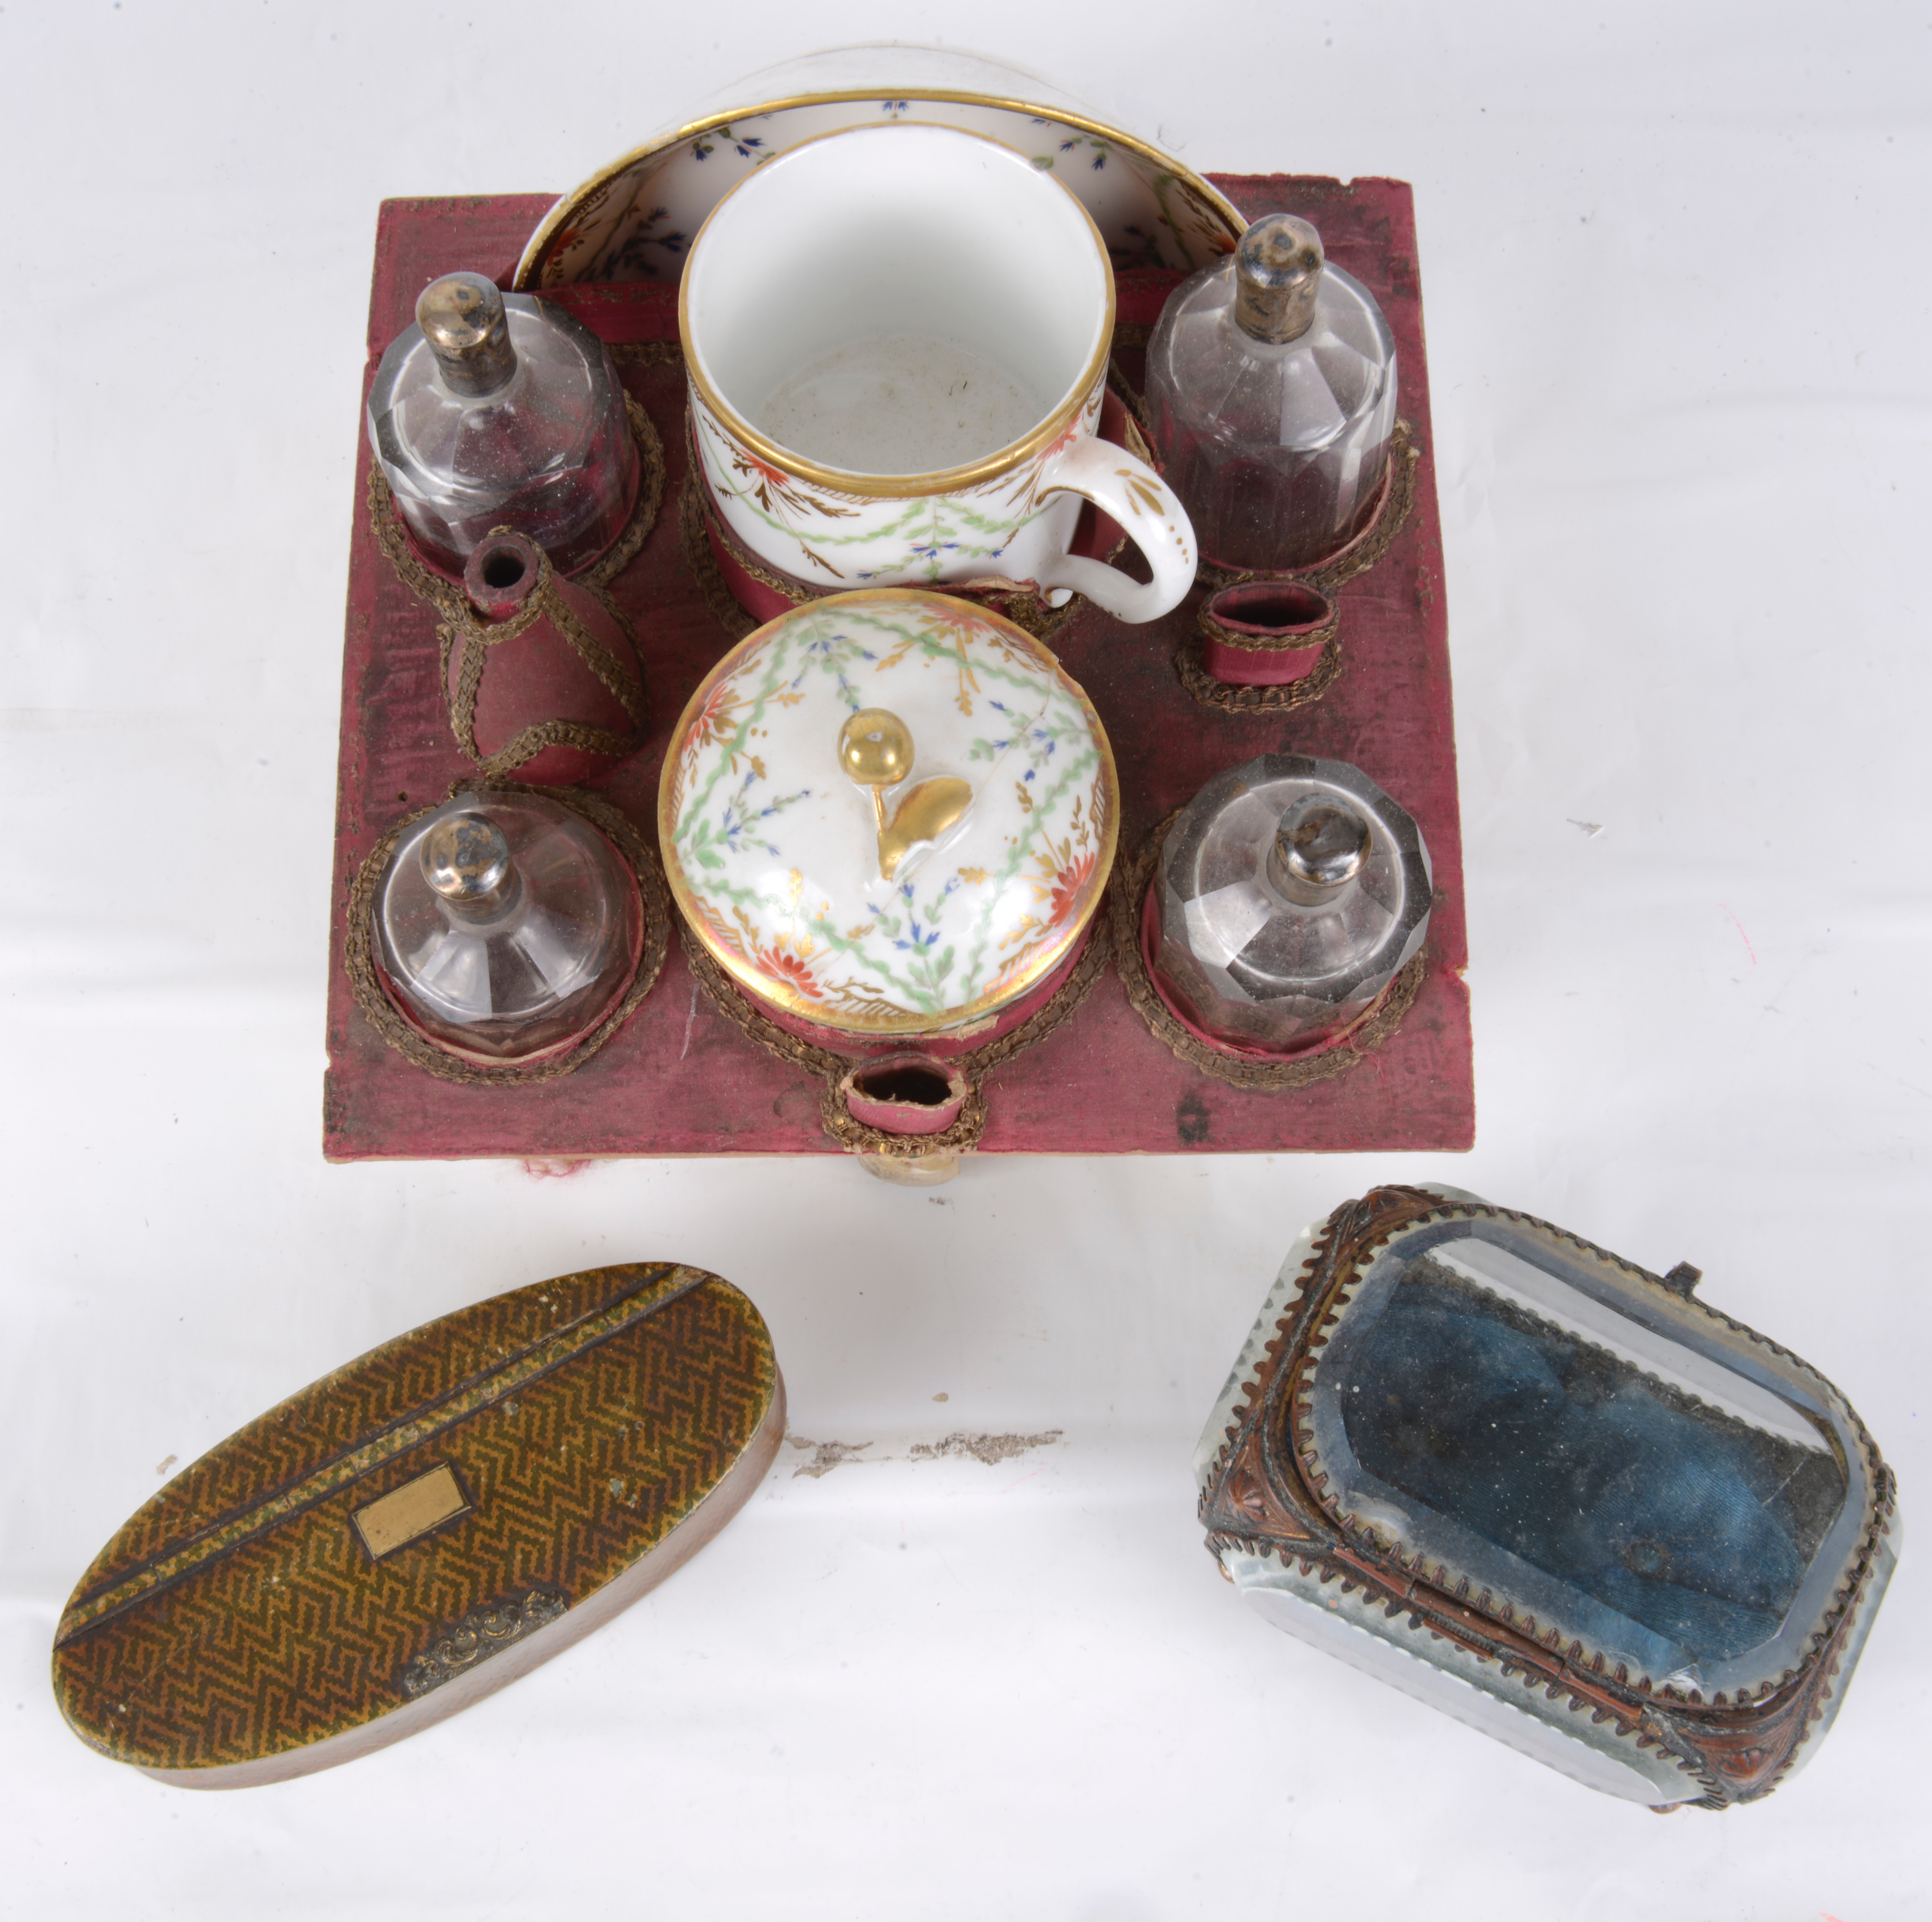 A Continental porcelain and glass travelling set, c1900 - Image 2 of 2